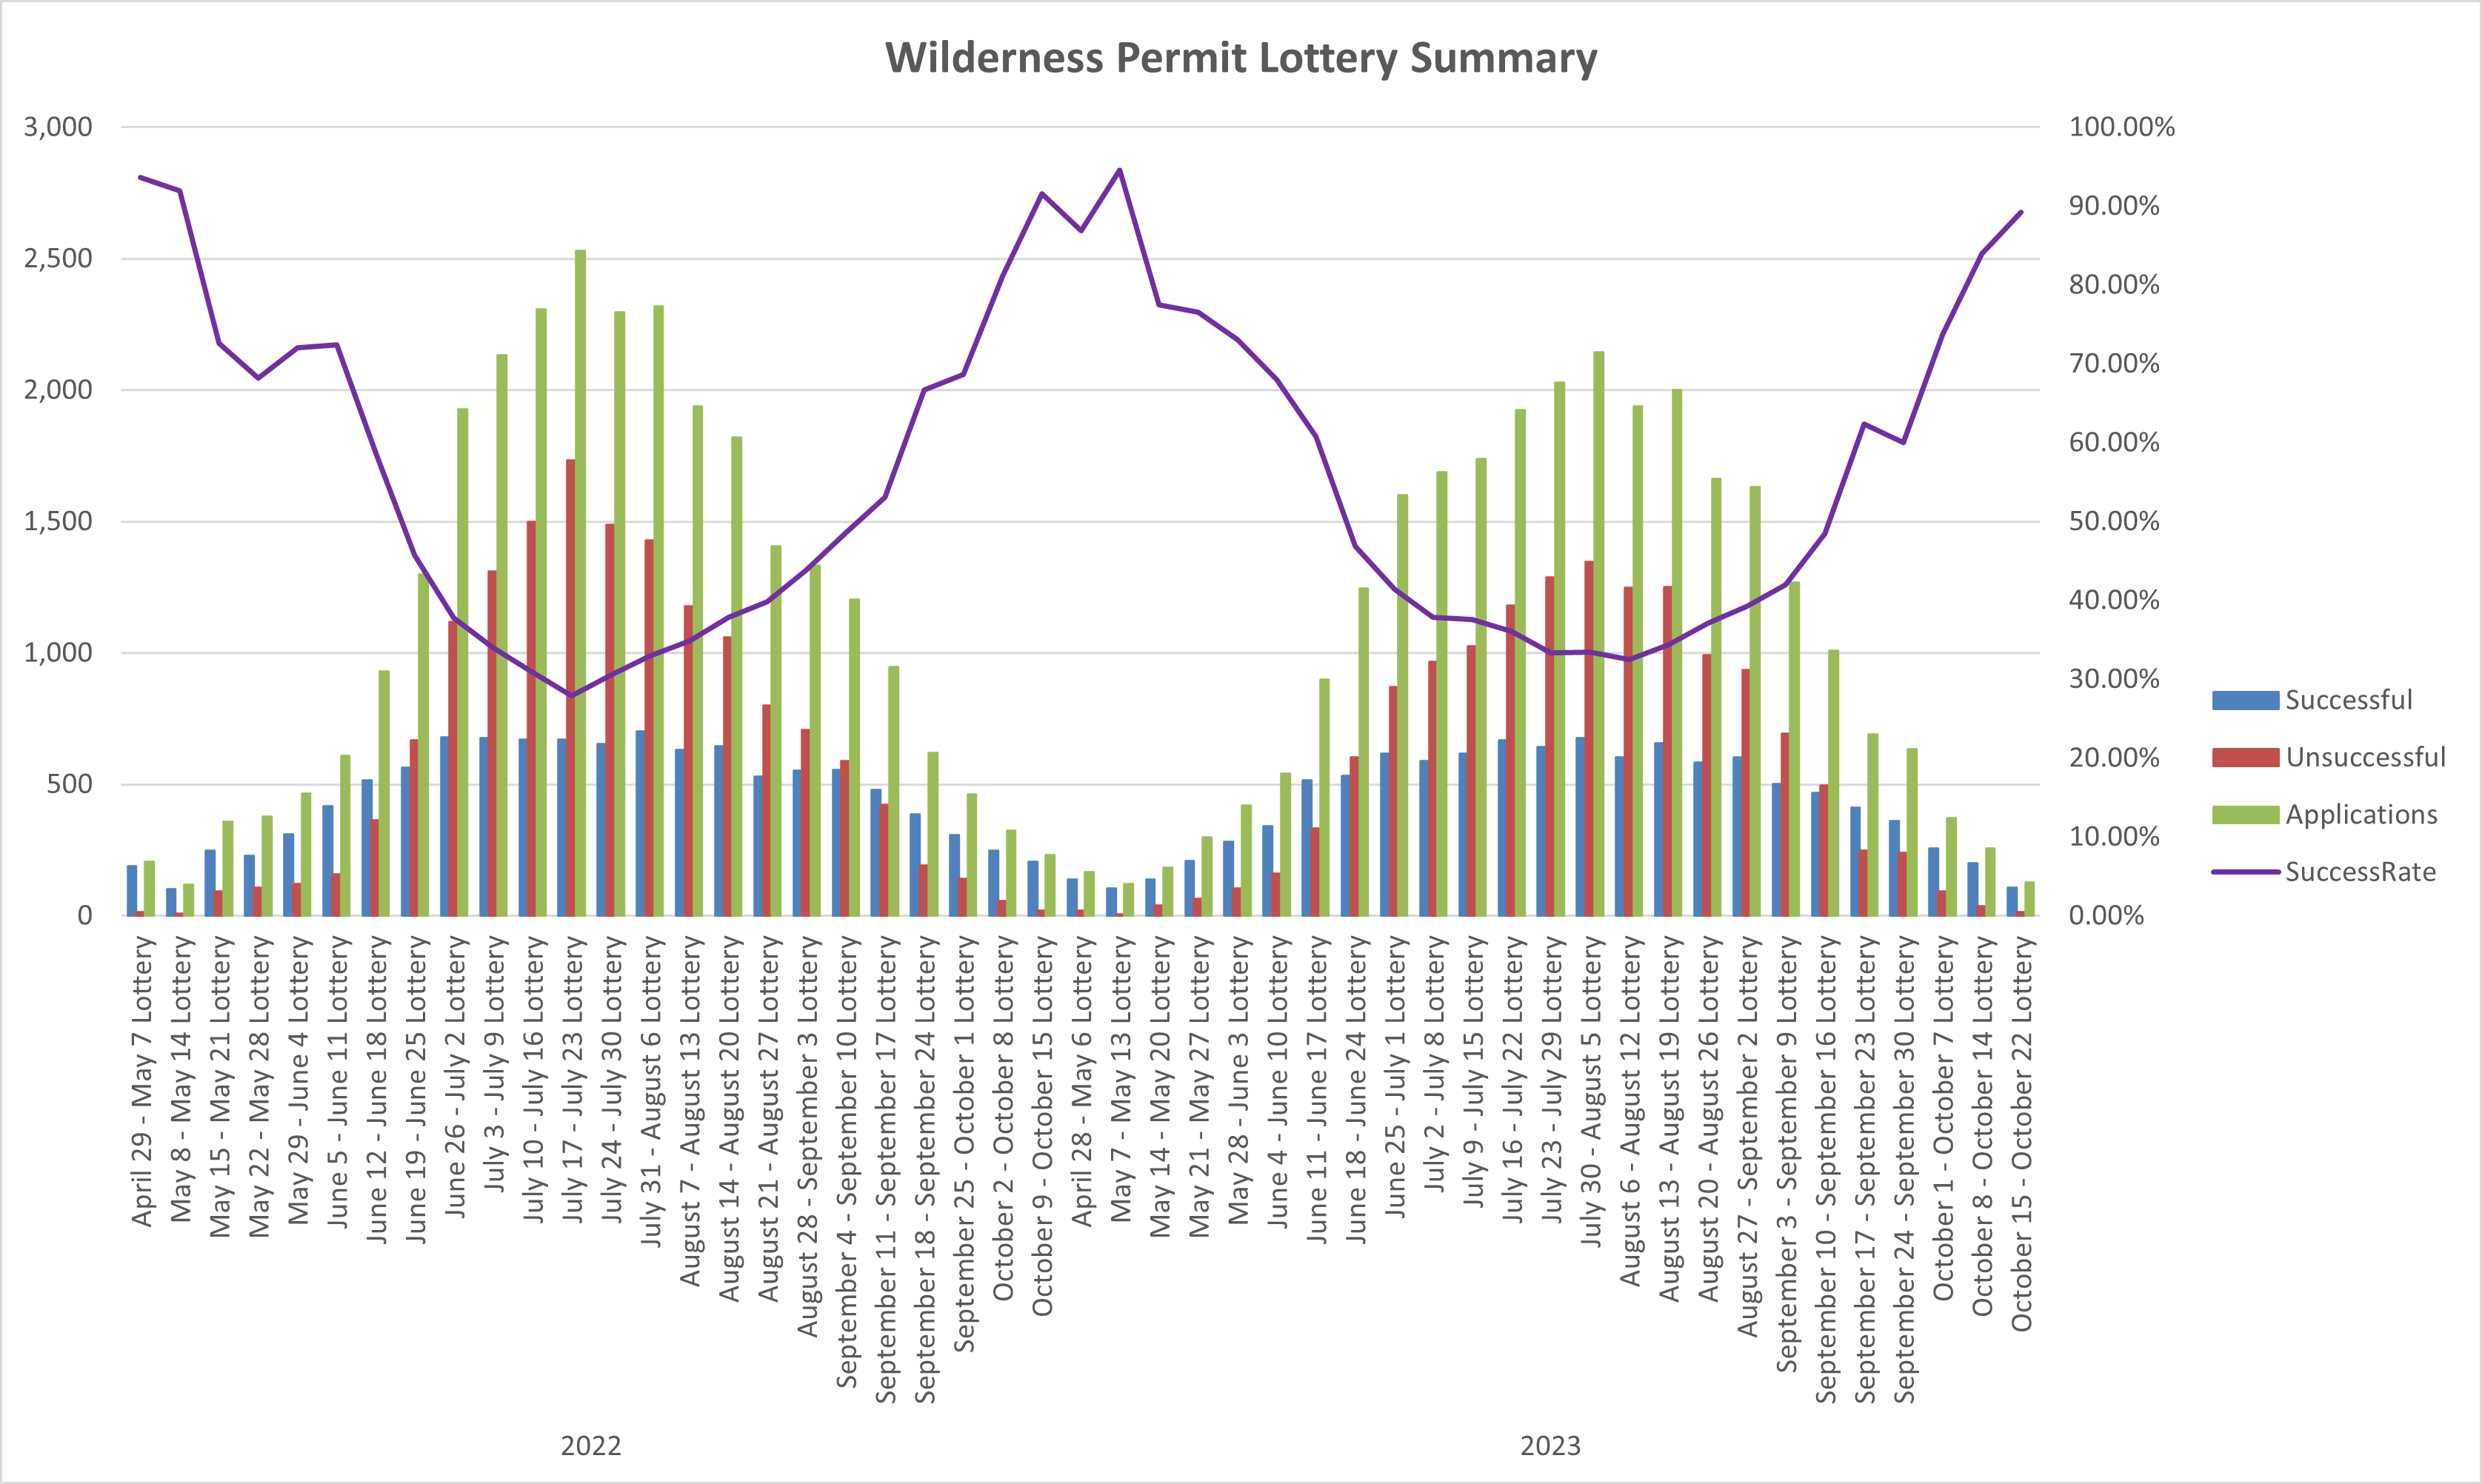 Bar Graph showing the number of applications for each Wilderness Permit Lottery in 2022 and 2023. Generally, for each year, the number of requests form a bell cover for requests